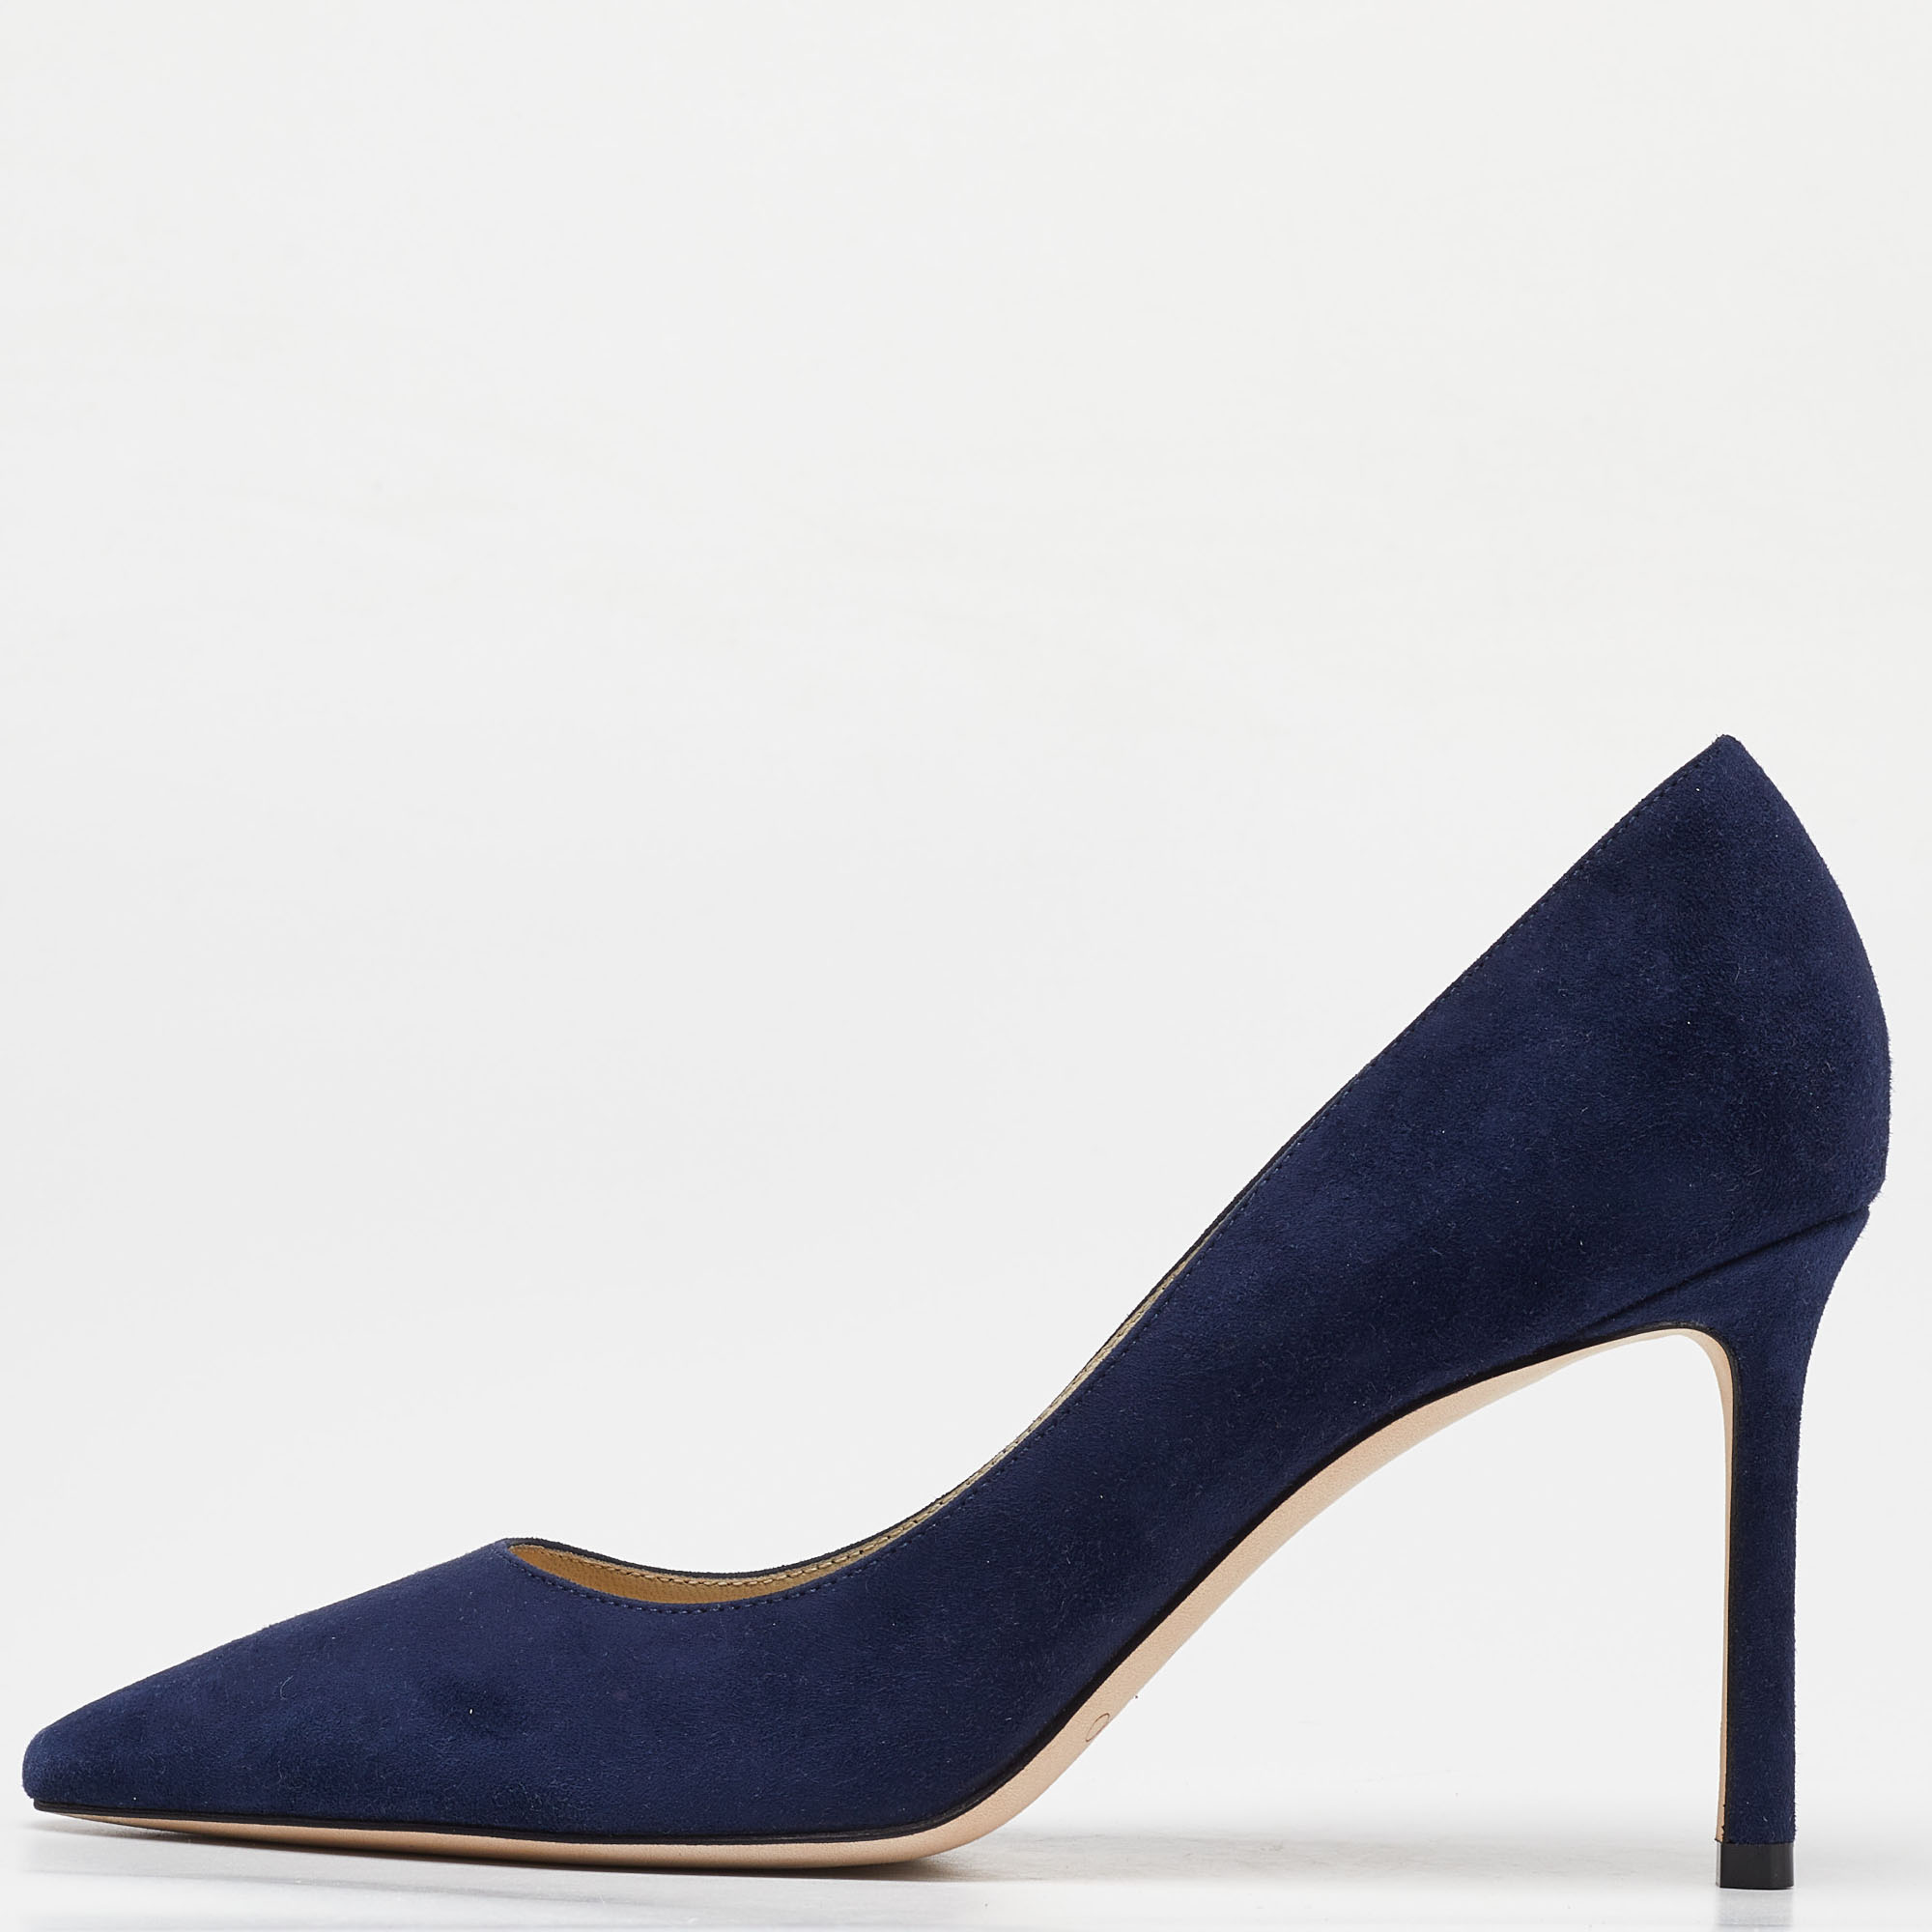 Jimmy choo navy blue suede romy pointed toe pumps size 37